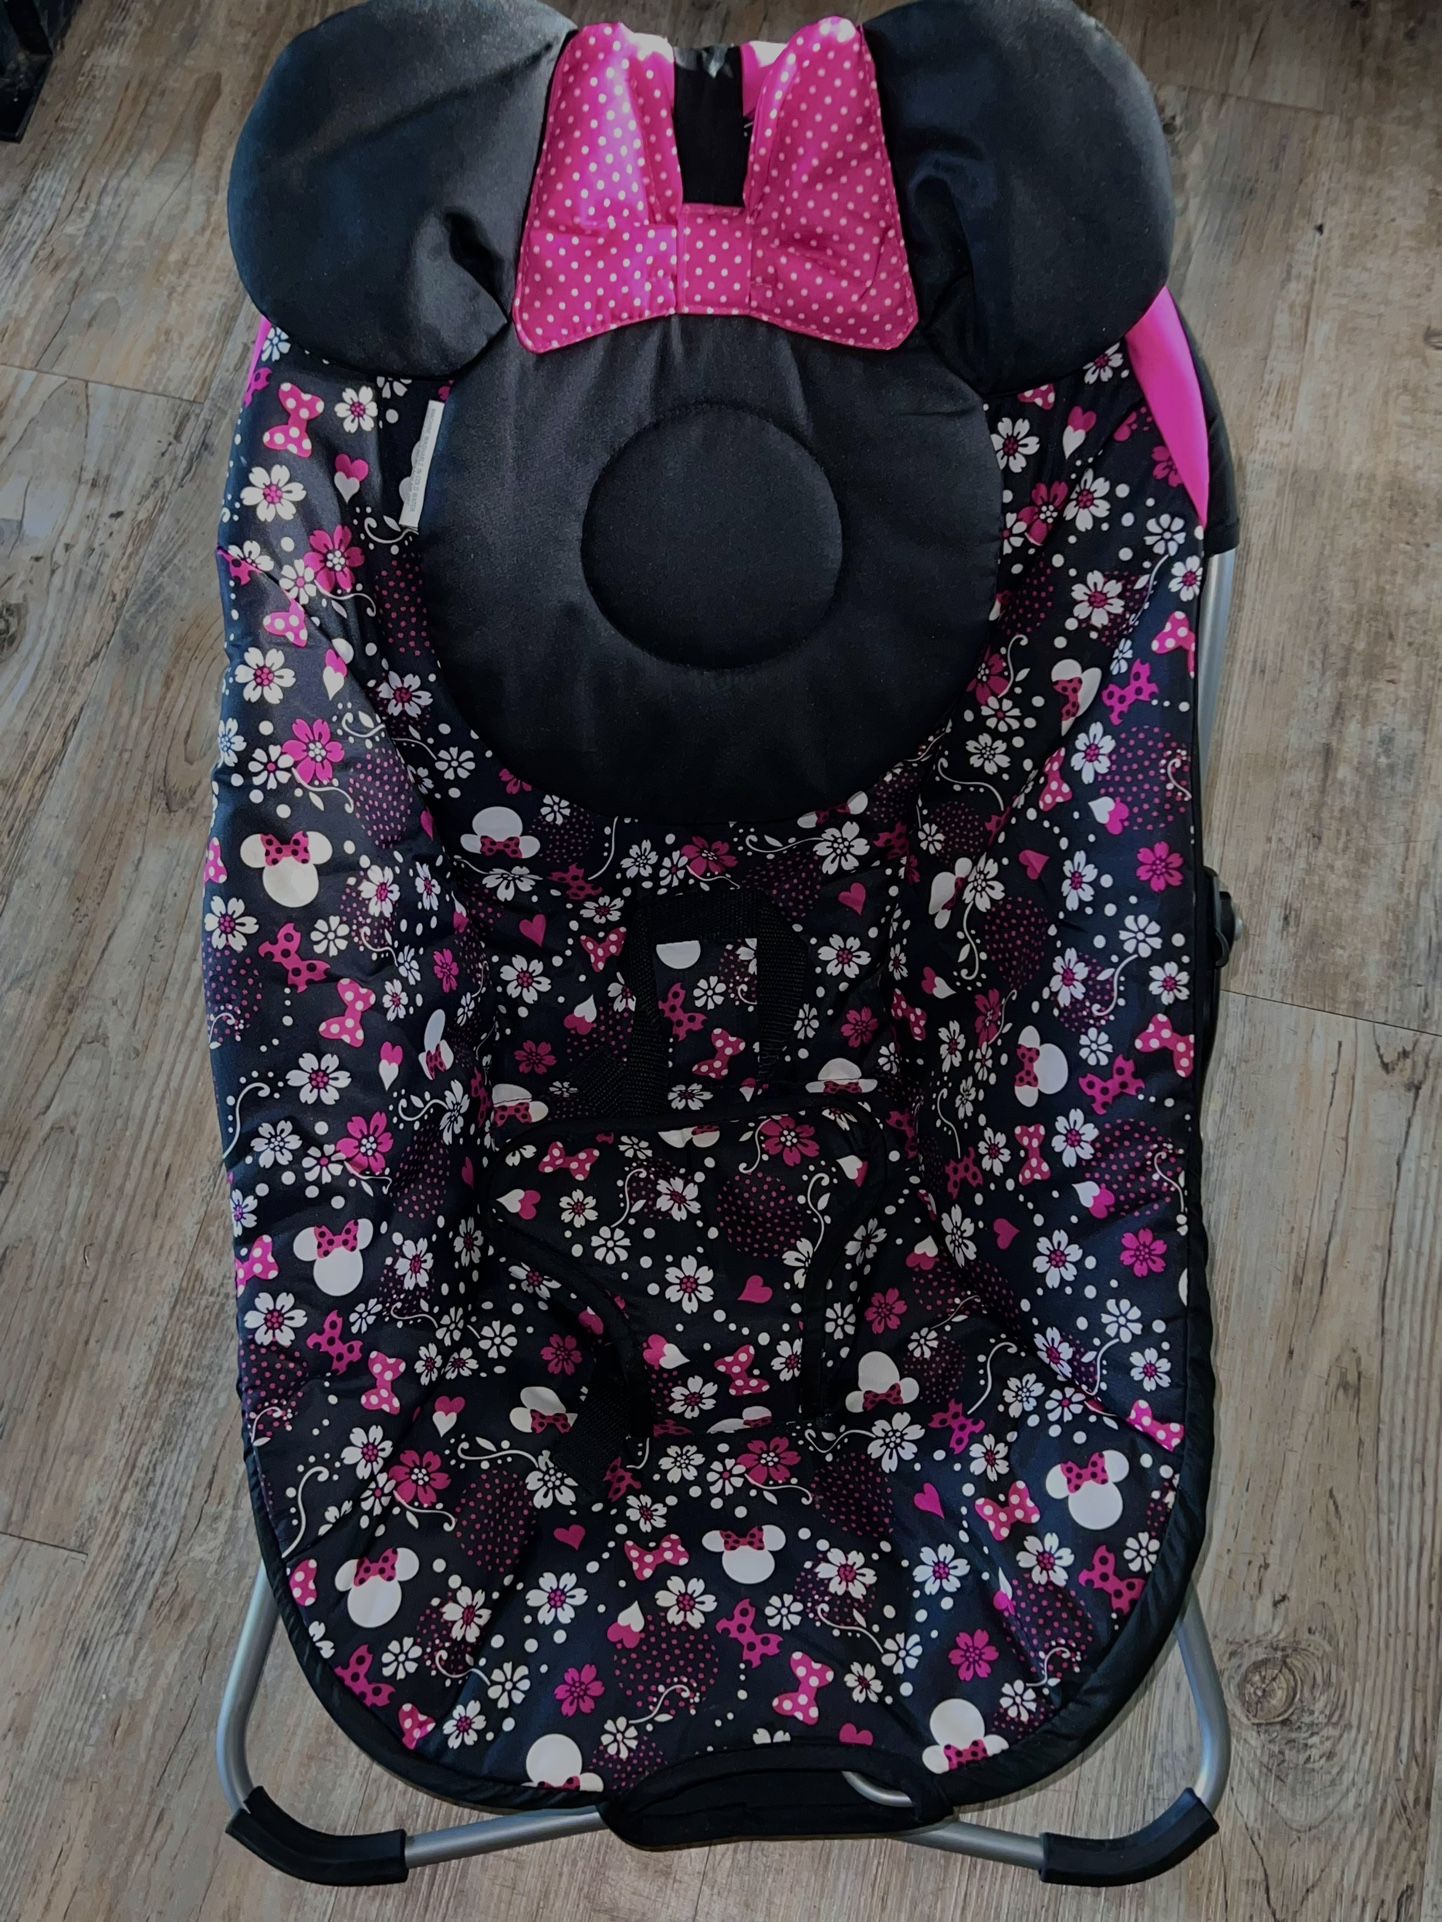 Minnie Mouse Bounce Chair 